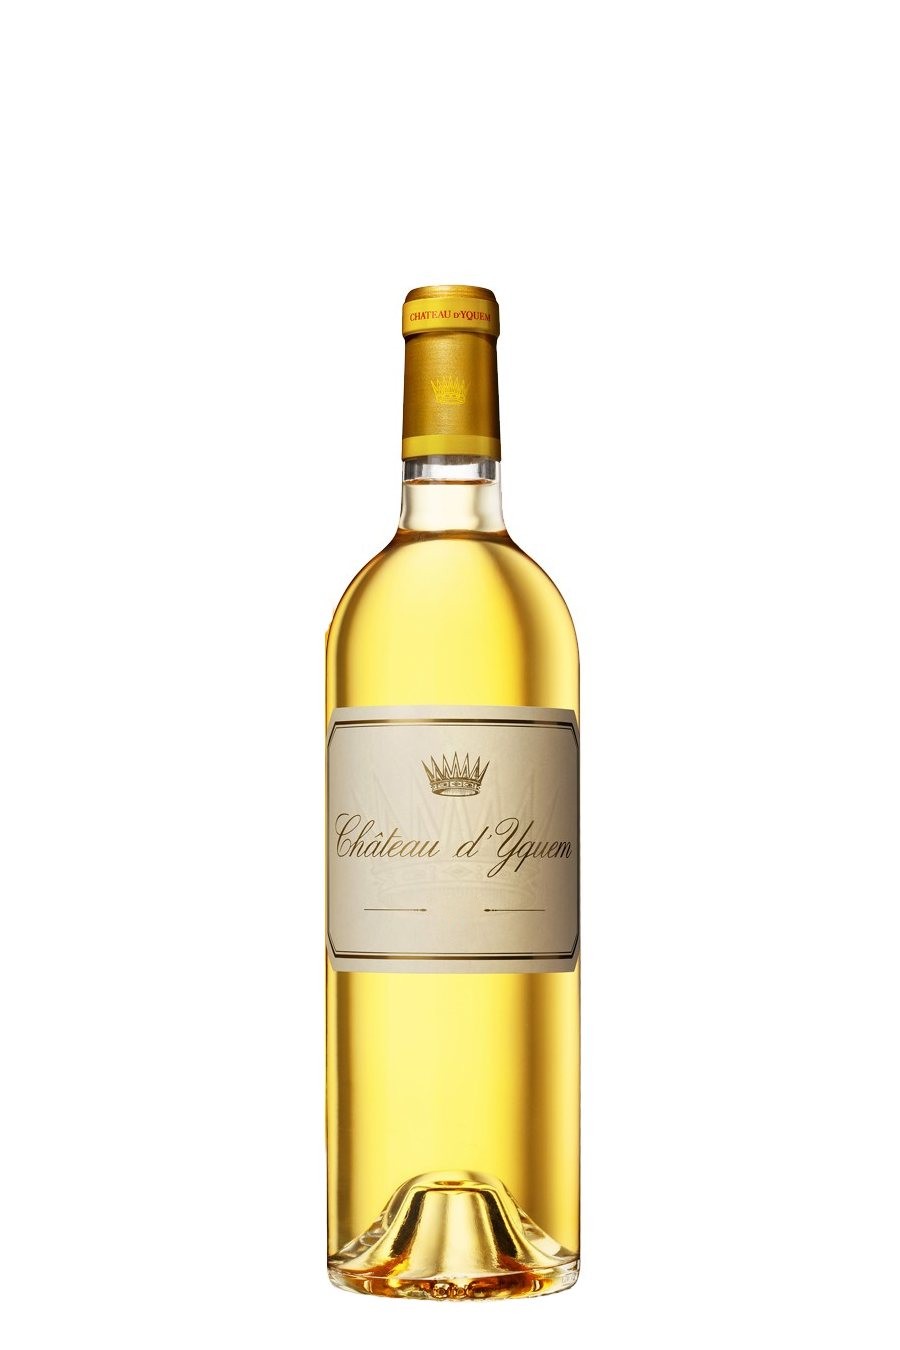 | d\'Yquem Wine Chateau Exquisite BuyWinesOnline Complex 2016 Sweet and Sauternes |